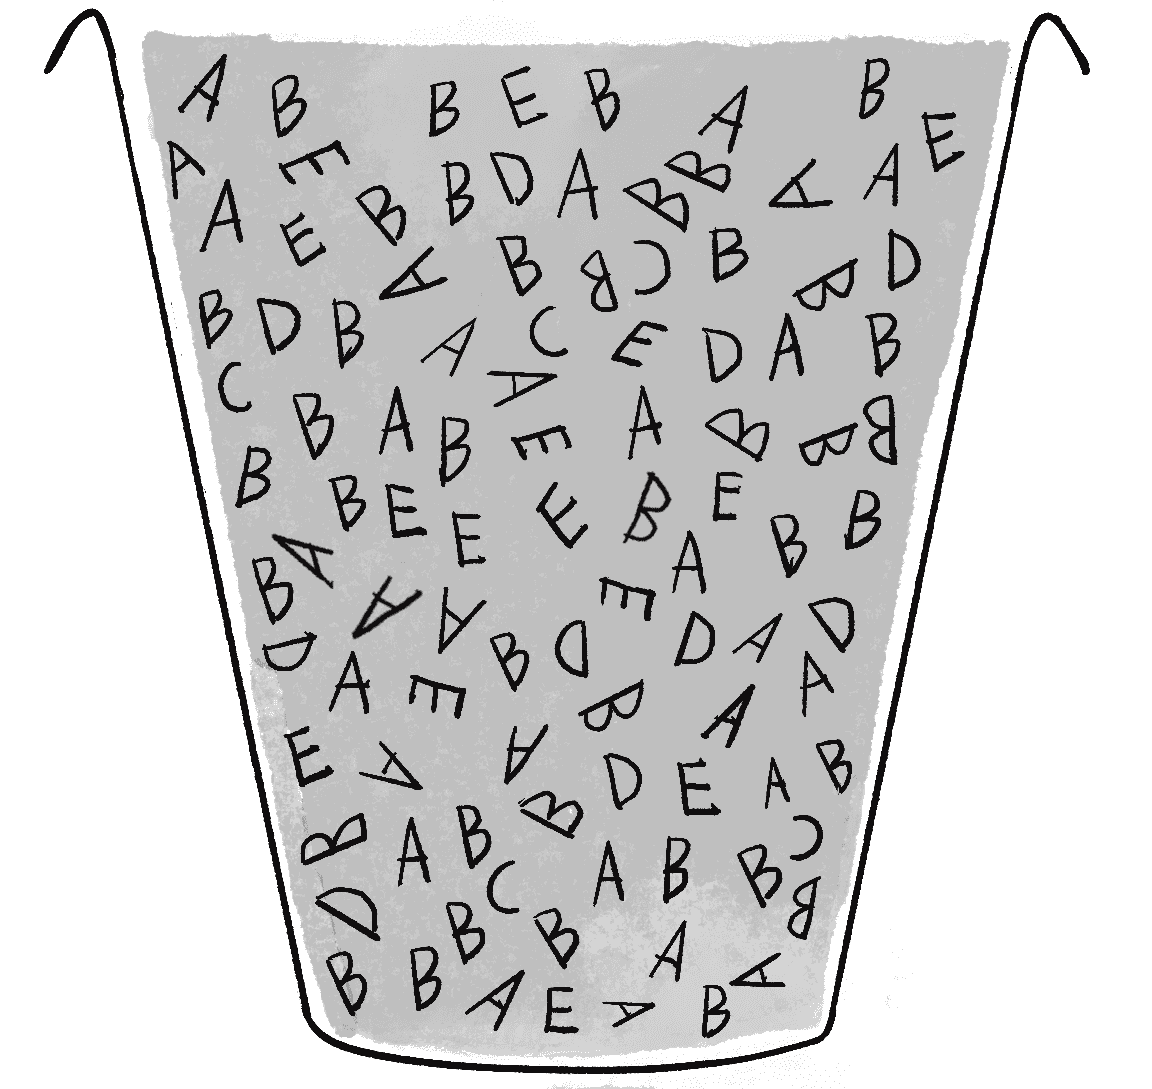 Figure 9.7: A bucket full of letters A, B, C, D, and E. The higher the fitness, the more instances of the letter in the bucket.